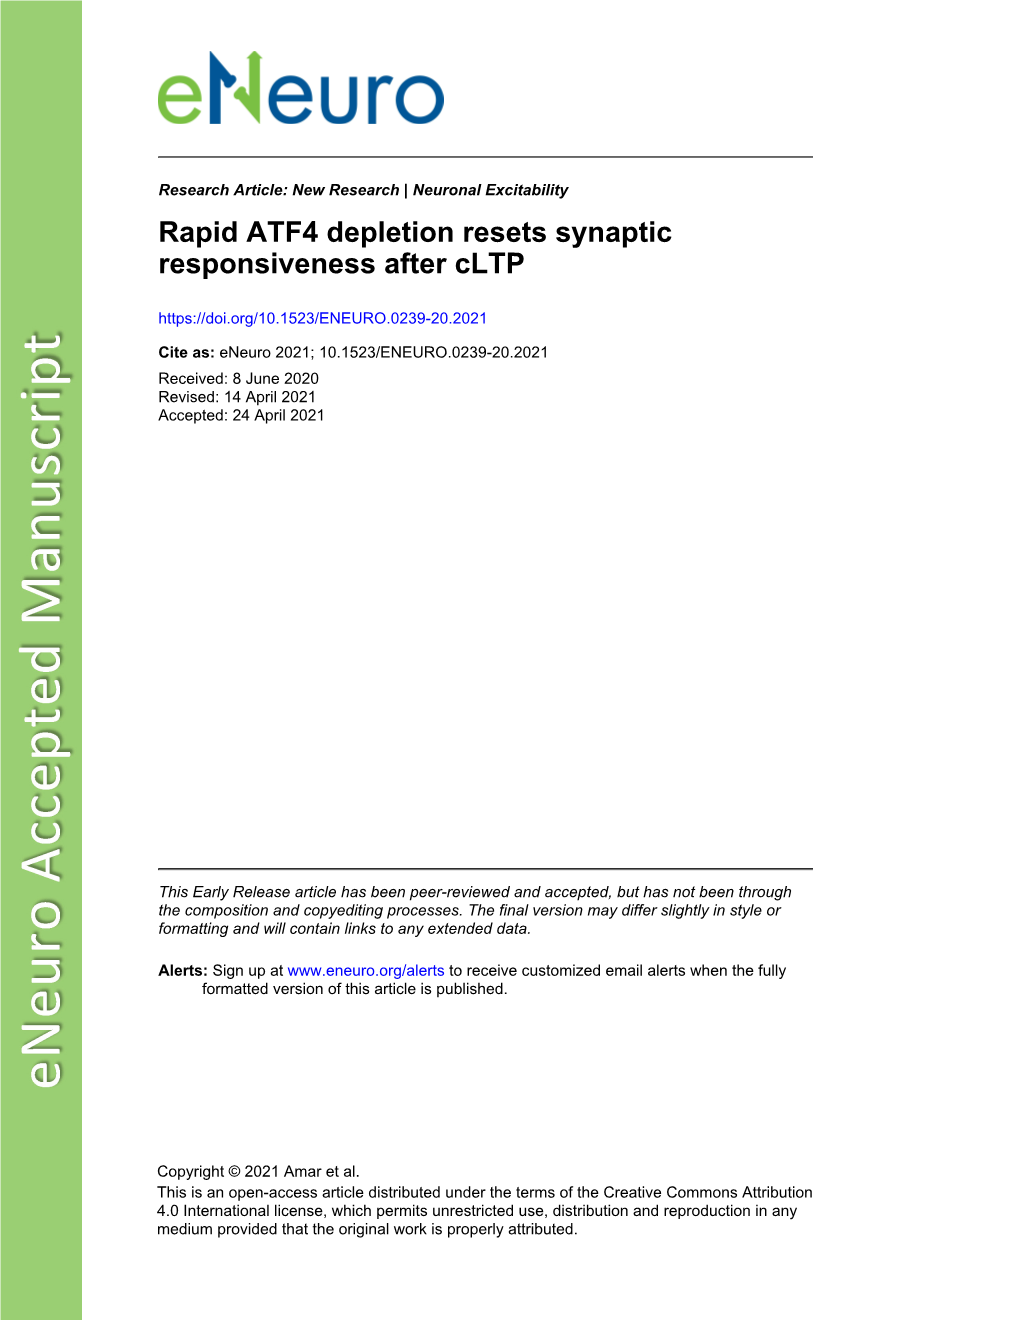 Rapid ATF4 Depletion Resets Synaptic Responsiveness After Cltp